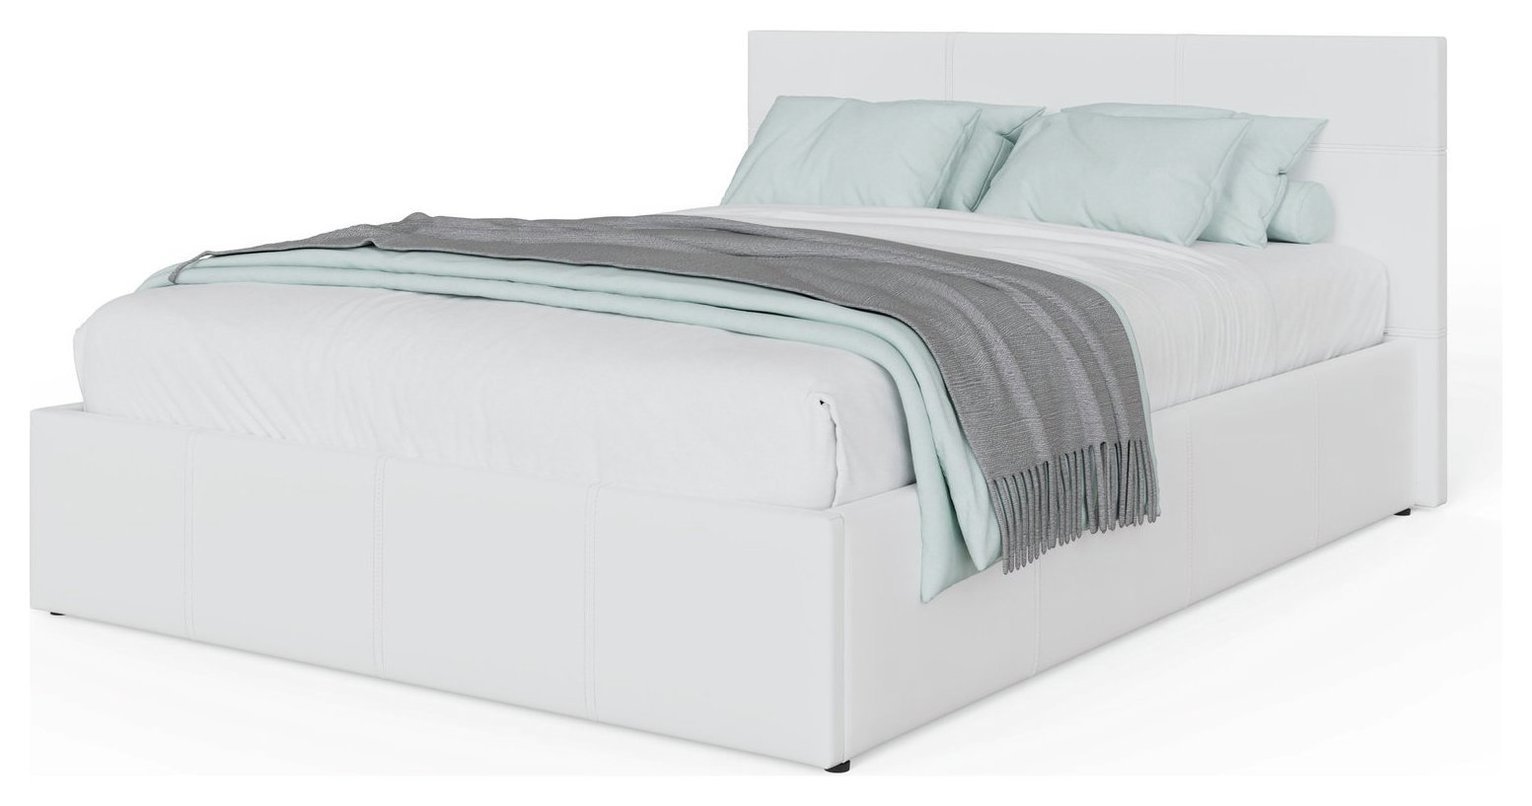 GFW End Lift Small Double Ottoman Bed Frame - White